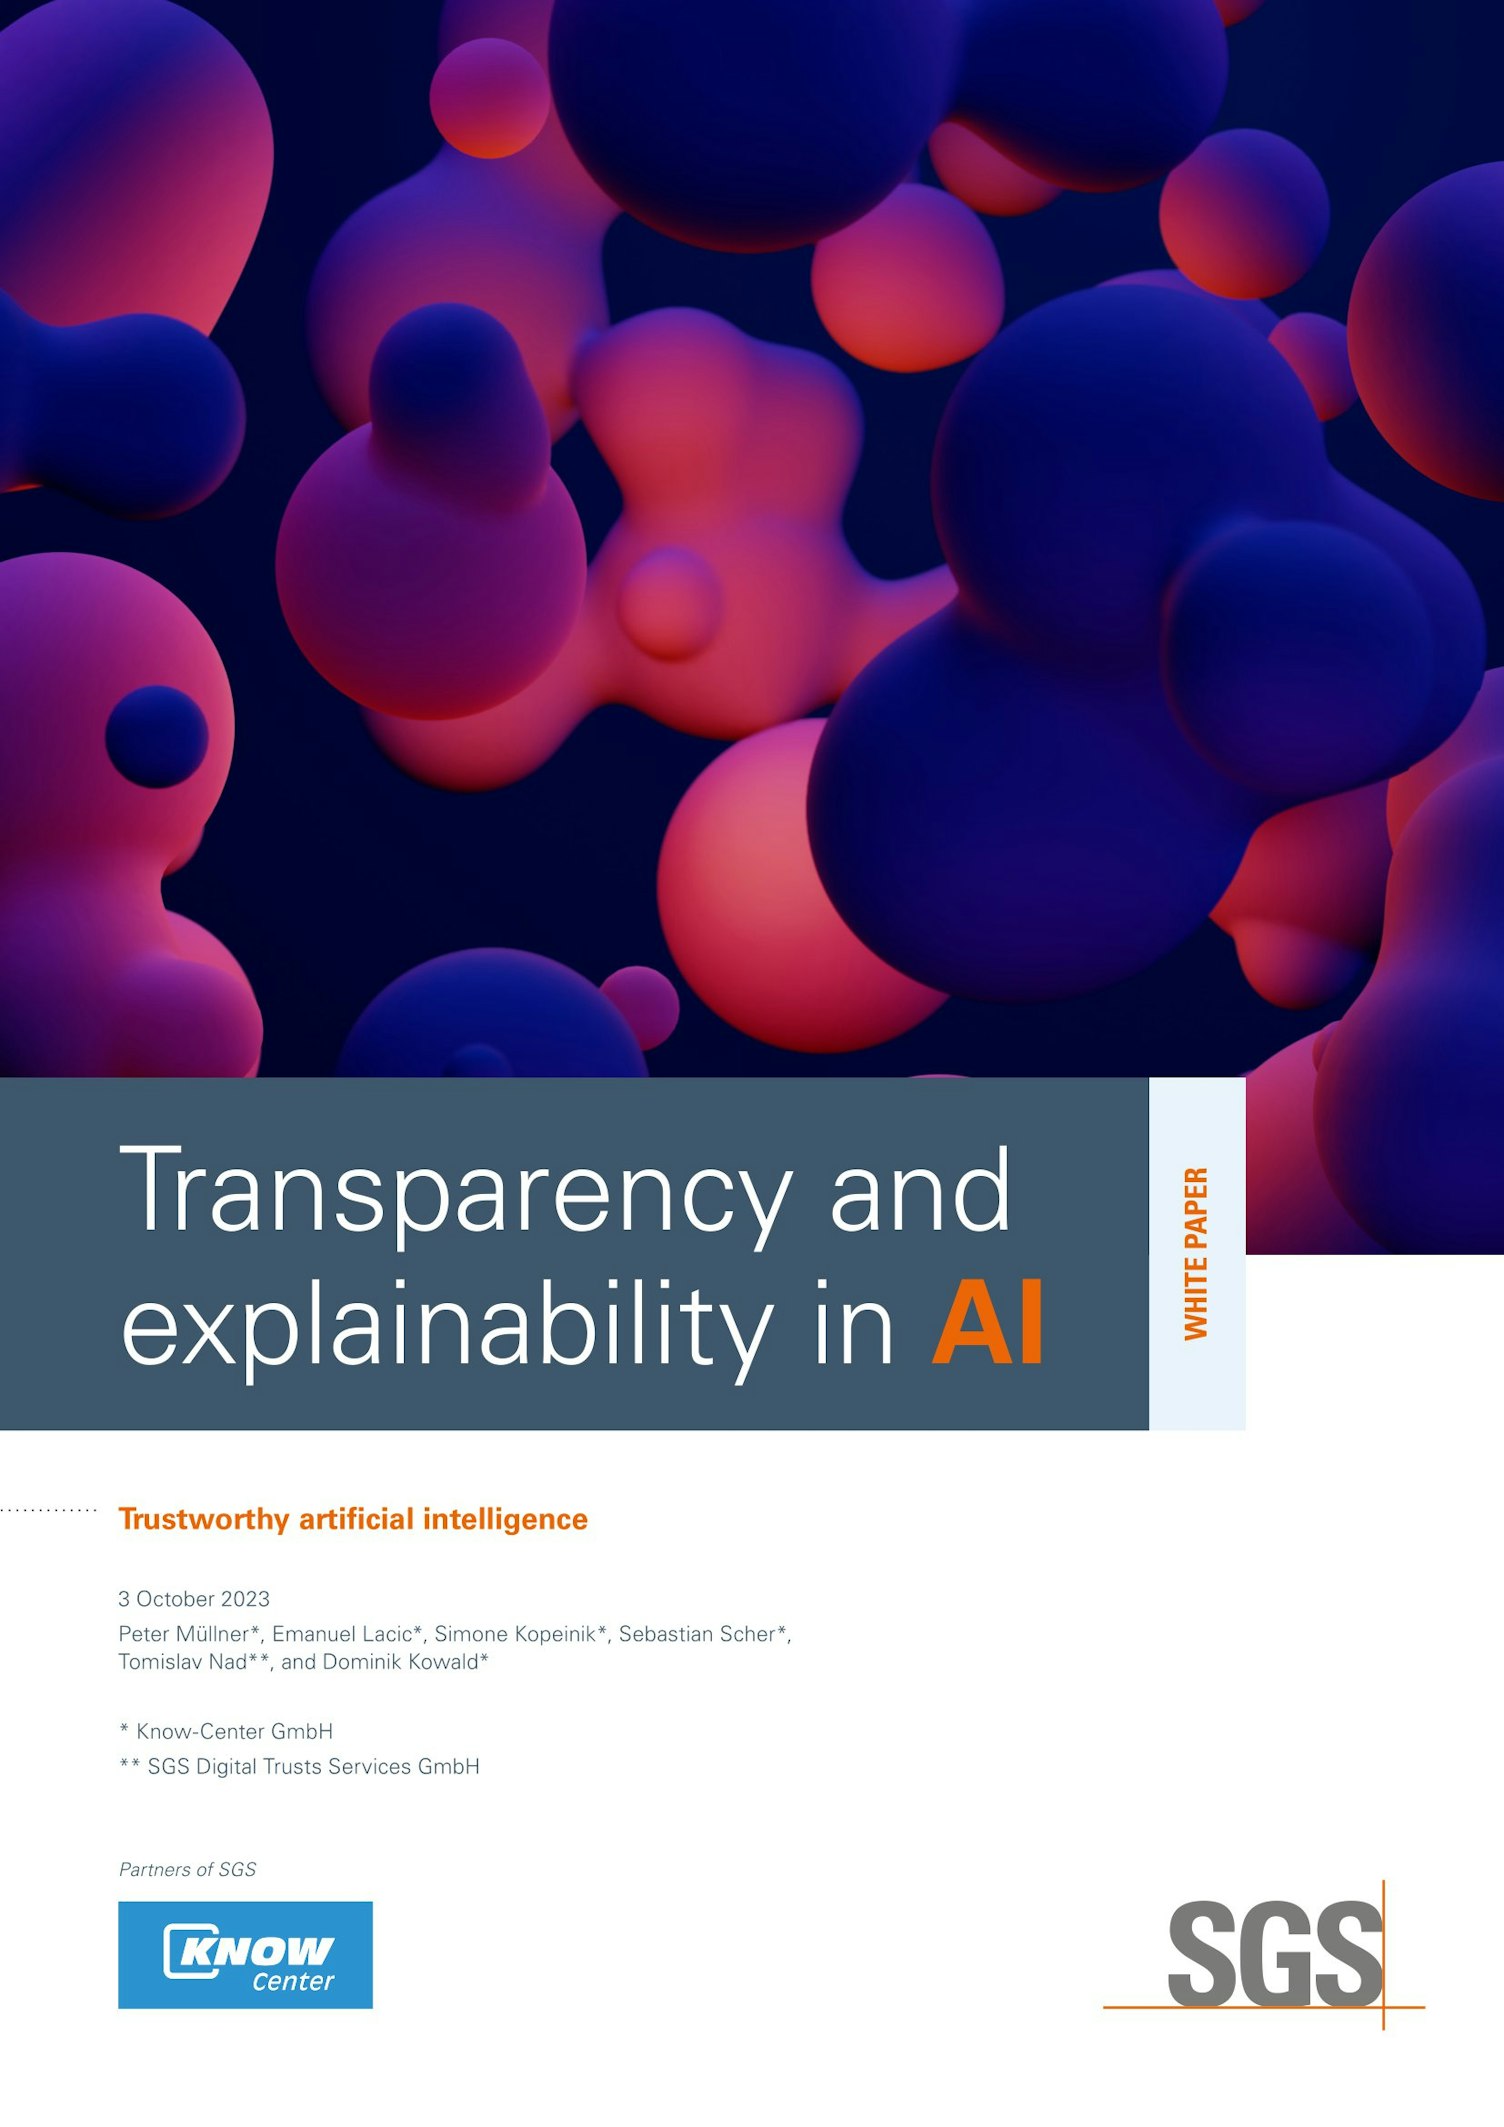 SGS DTI AI WhitepaperTransparency and explainability in AI